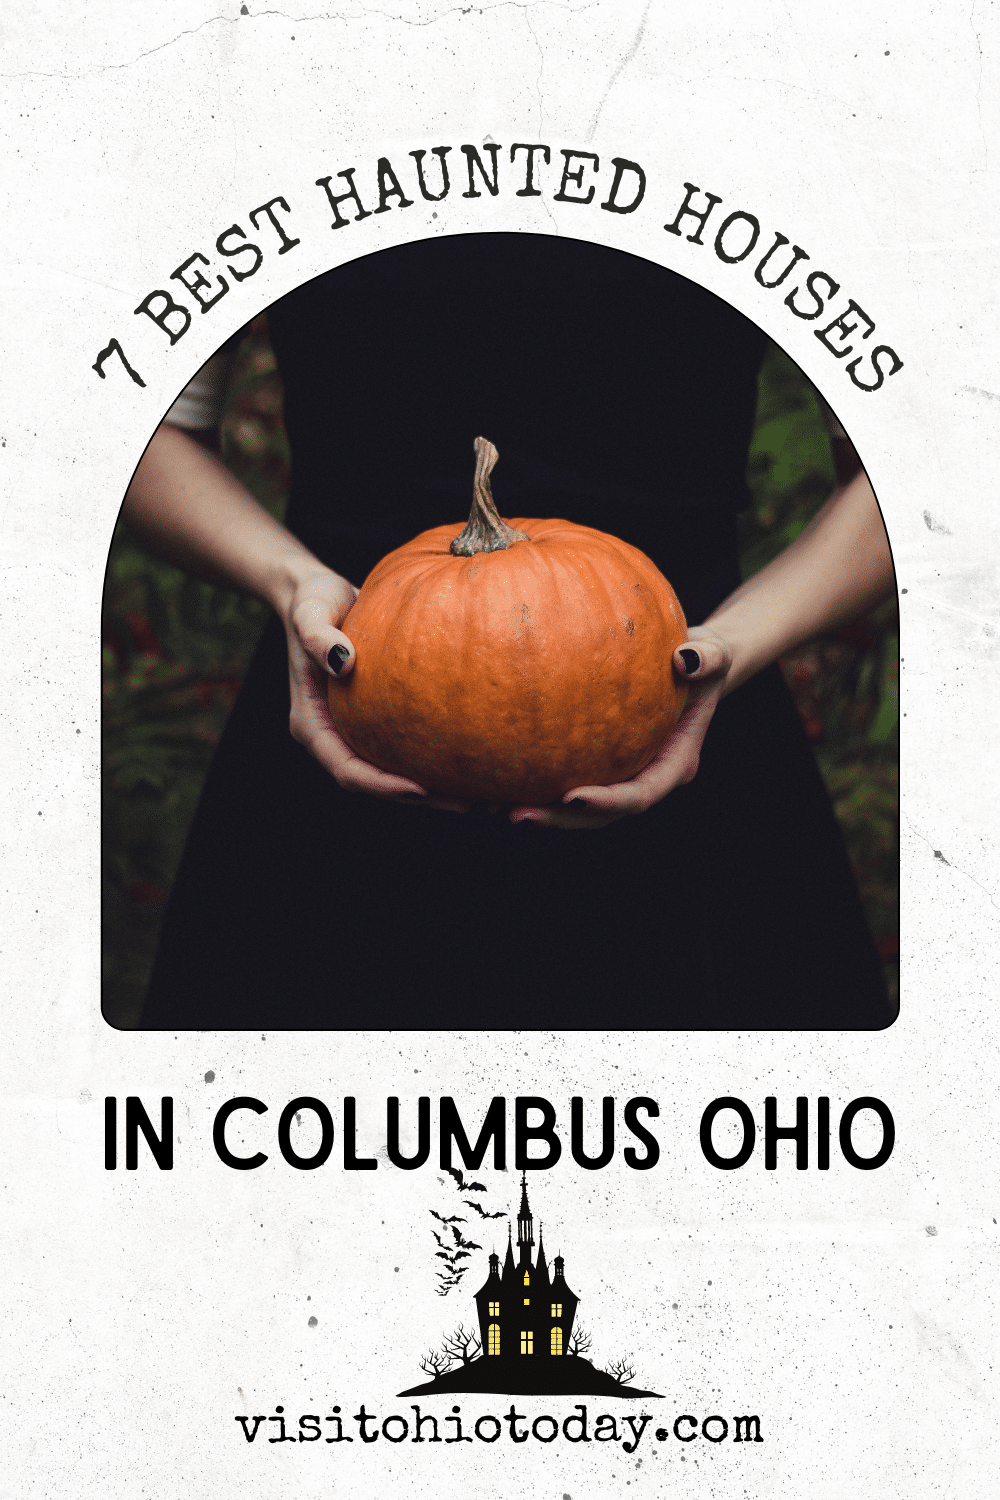 Looking for Haunted Houses in Columbus Ohio? We have got you covered with a comprehensive listing of haunted attractions in Ohio. #hauntedhouse #ohio #hauntedohio